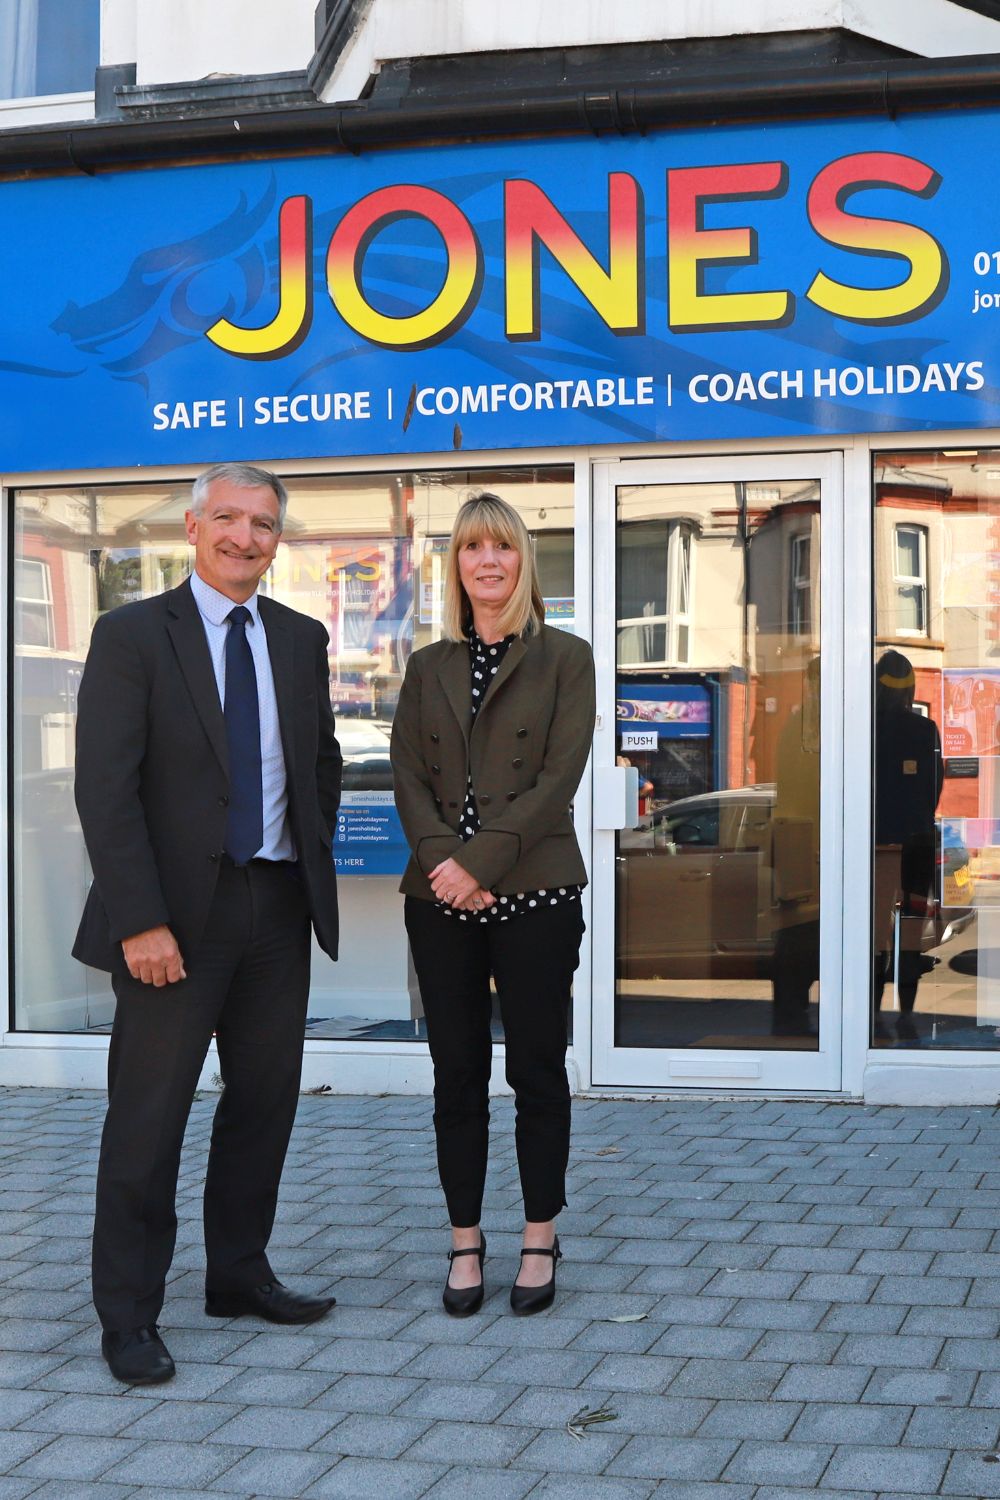 MD Chris Owens with Head of Sales and Marketing, Beverley Cooke, outside the new Jones Holidays shop in Craig-y-don, Llandudno